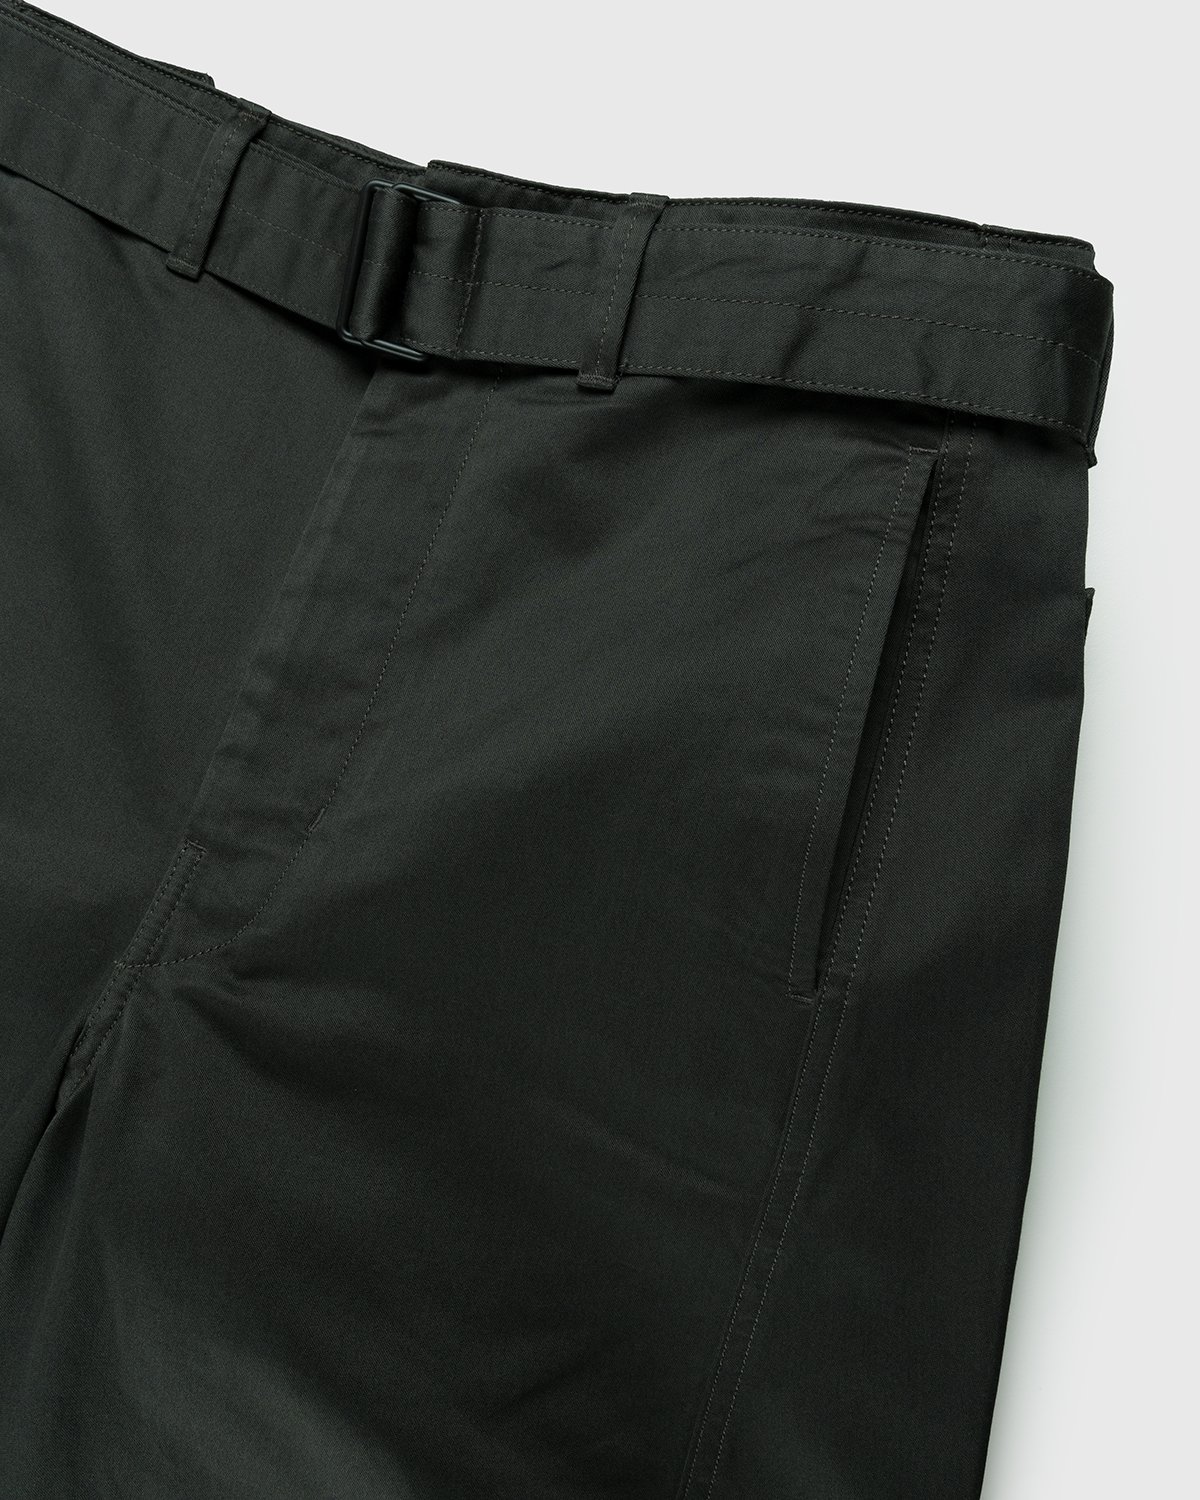 Lemaire - Twisted Belted Pants Dark Slate Green - Clothing - Grey - Image 4